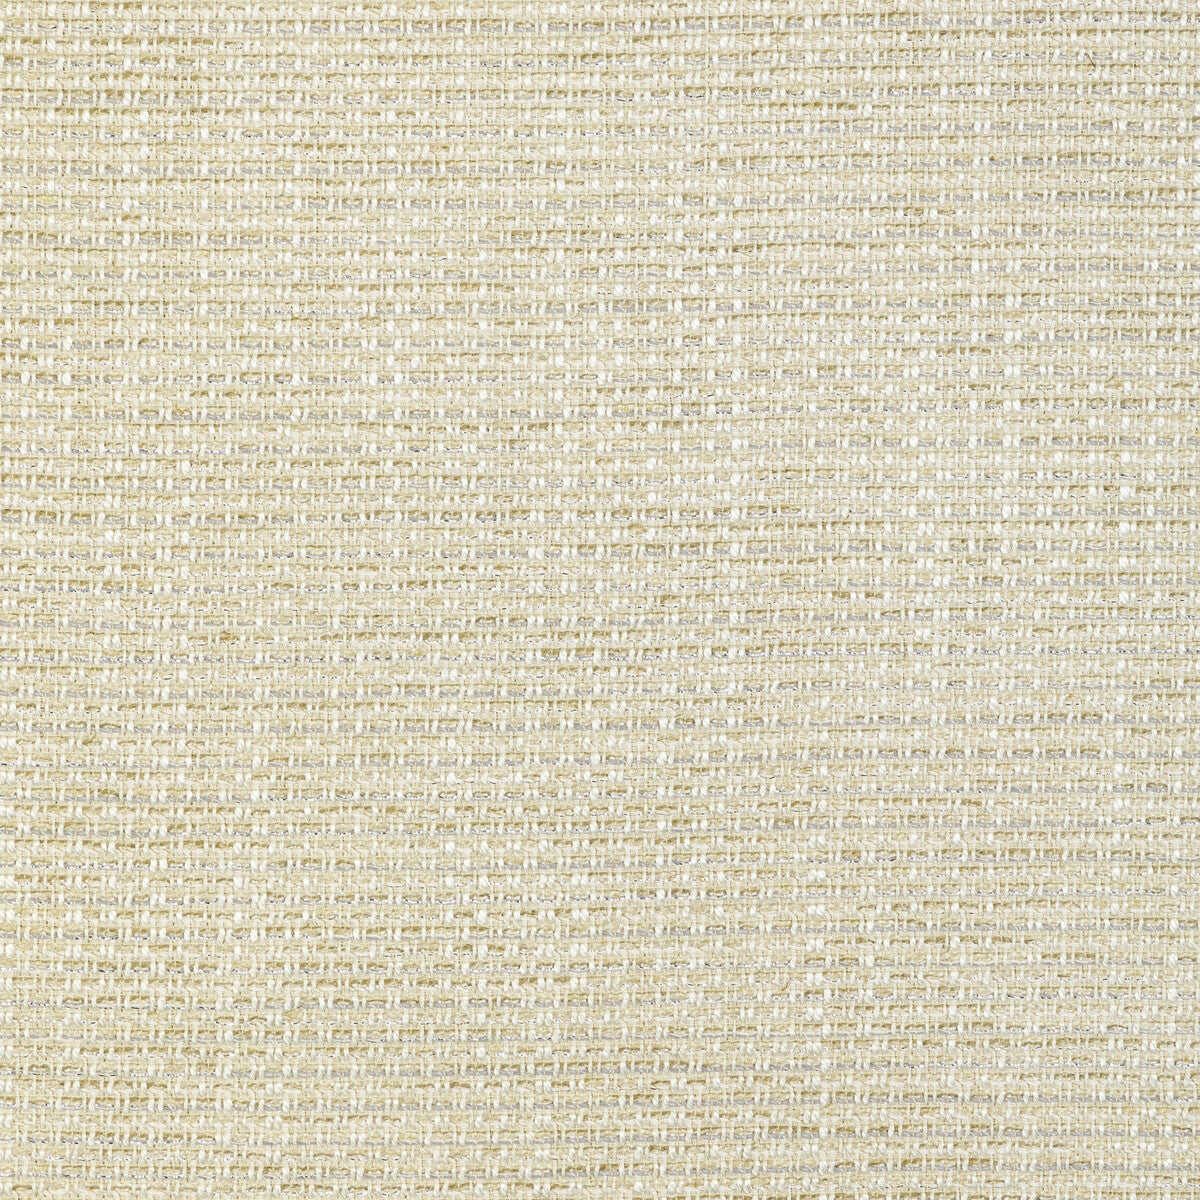 Metallic Wonder fabric in cream color - pattern 36800.16.0 - by Kravet Design in the Candice Olson collection